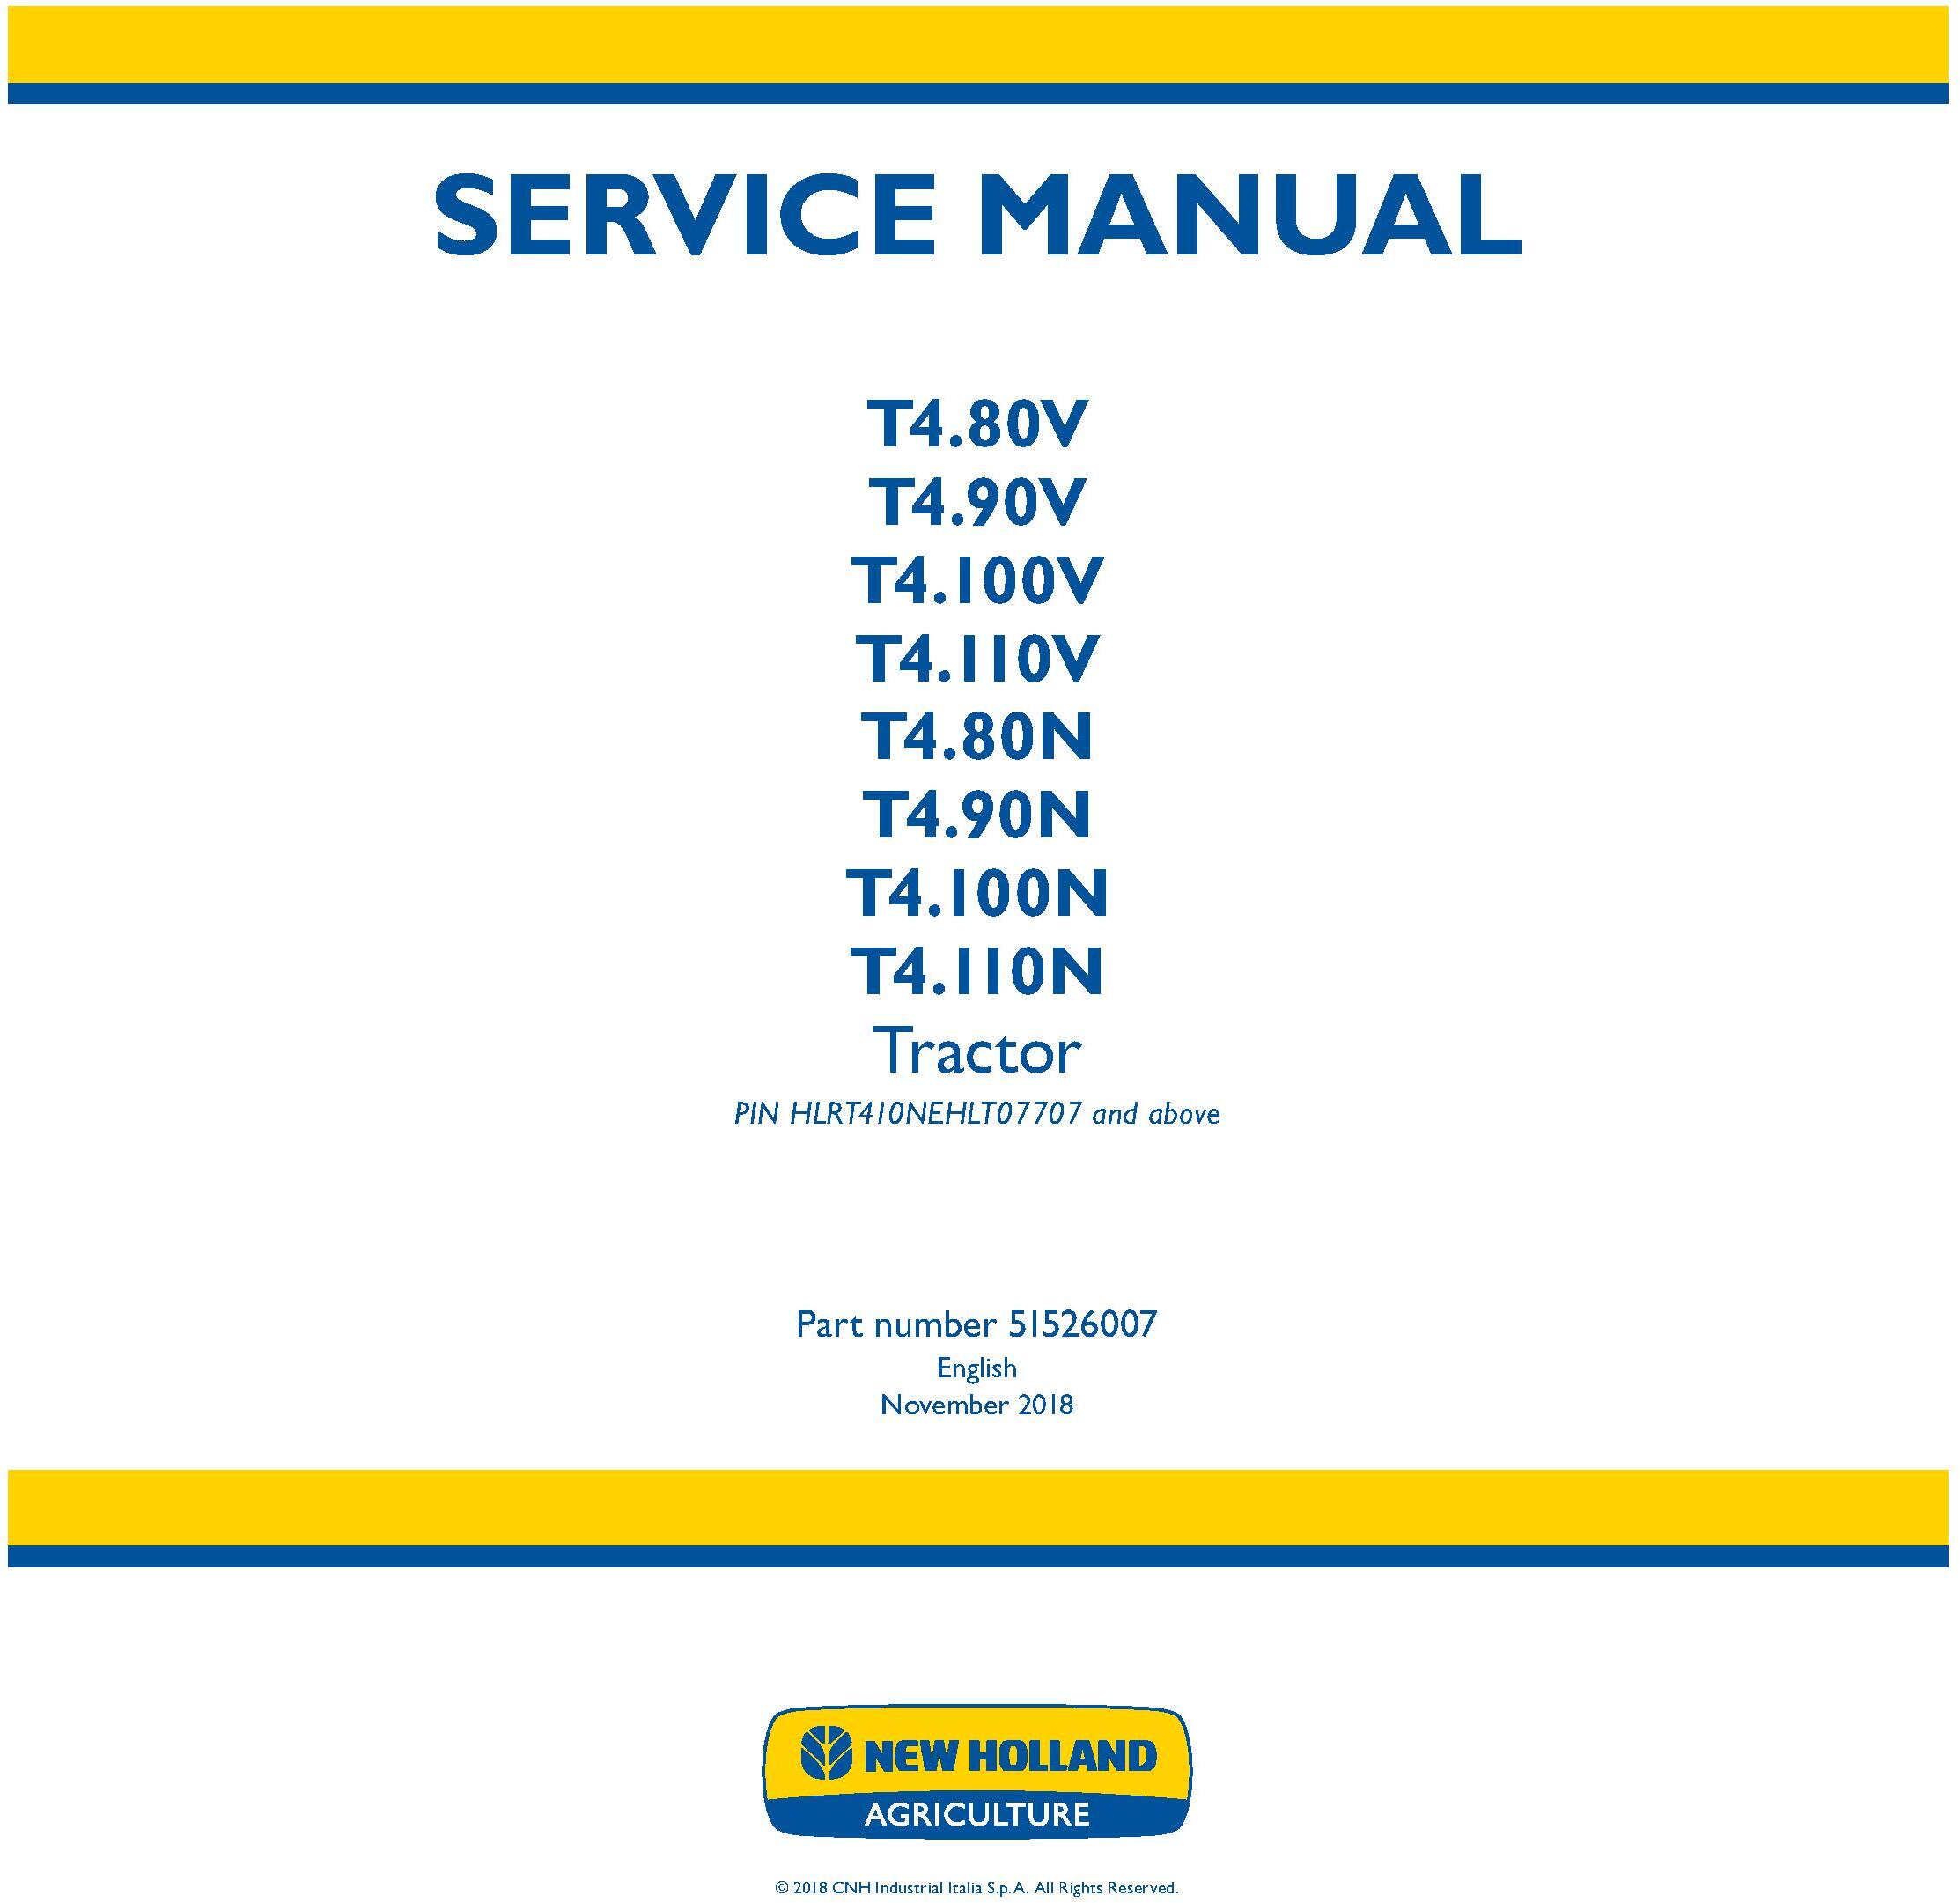 New Holland T4.80V/N, T4.90V/N, T4.100V/N, T4.110V/N Tractor Tier 4A and StageIIIB Service Manual